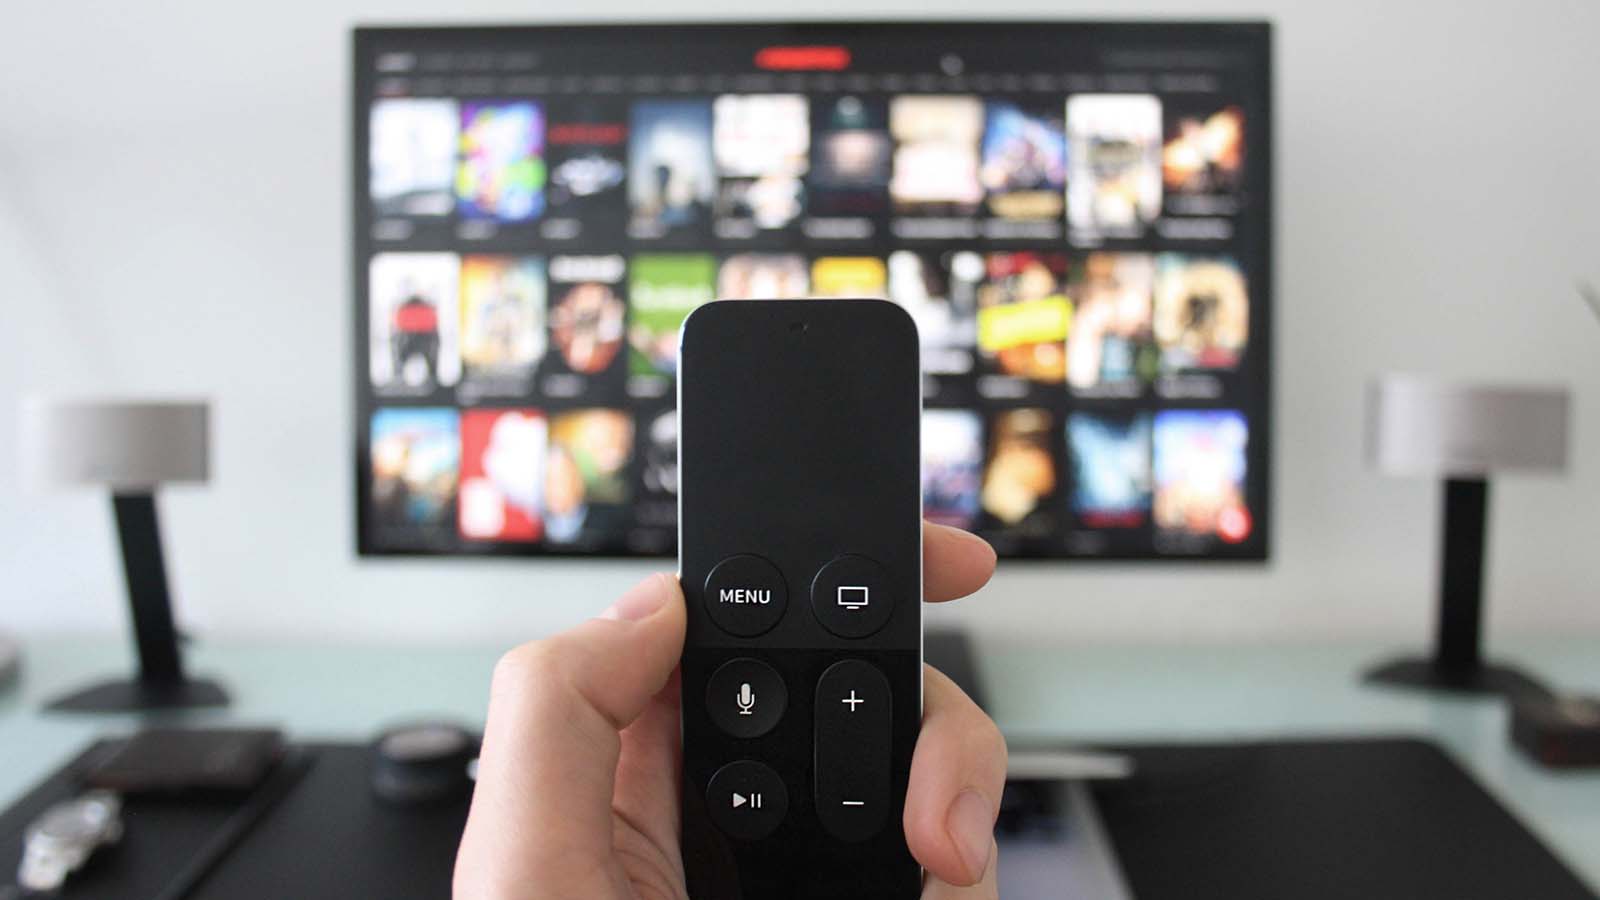 A close-up shot of a hand holding a TV remote with a blurred screen in the background.